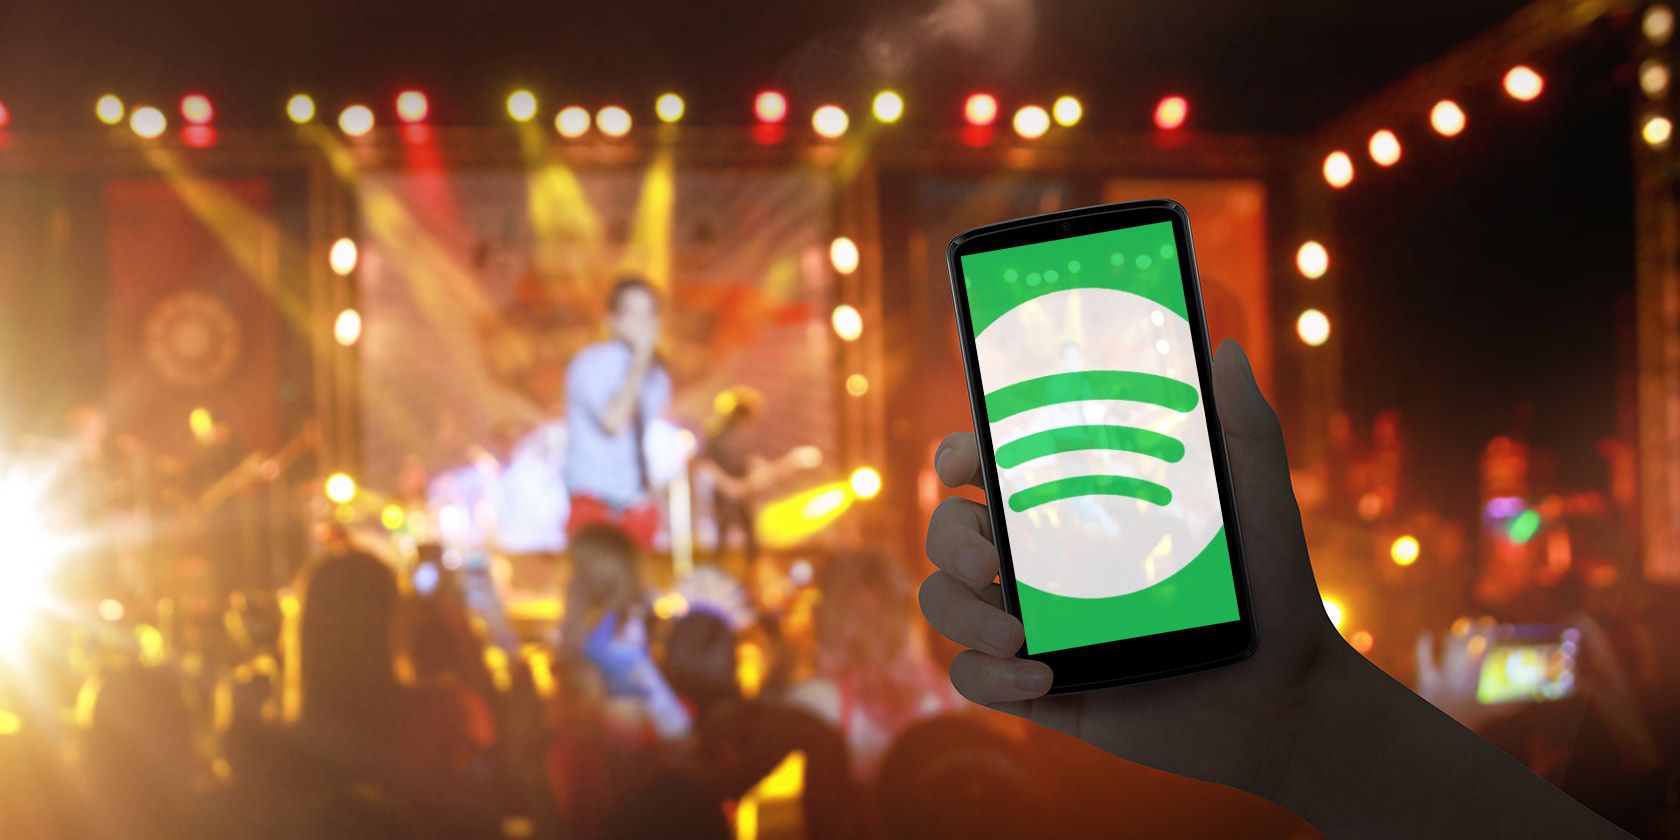 spotify stock falls apart when to buy